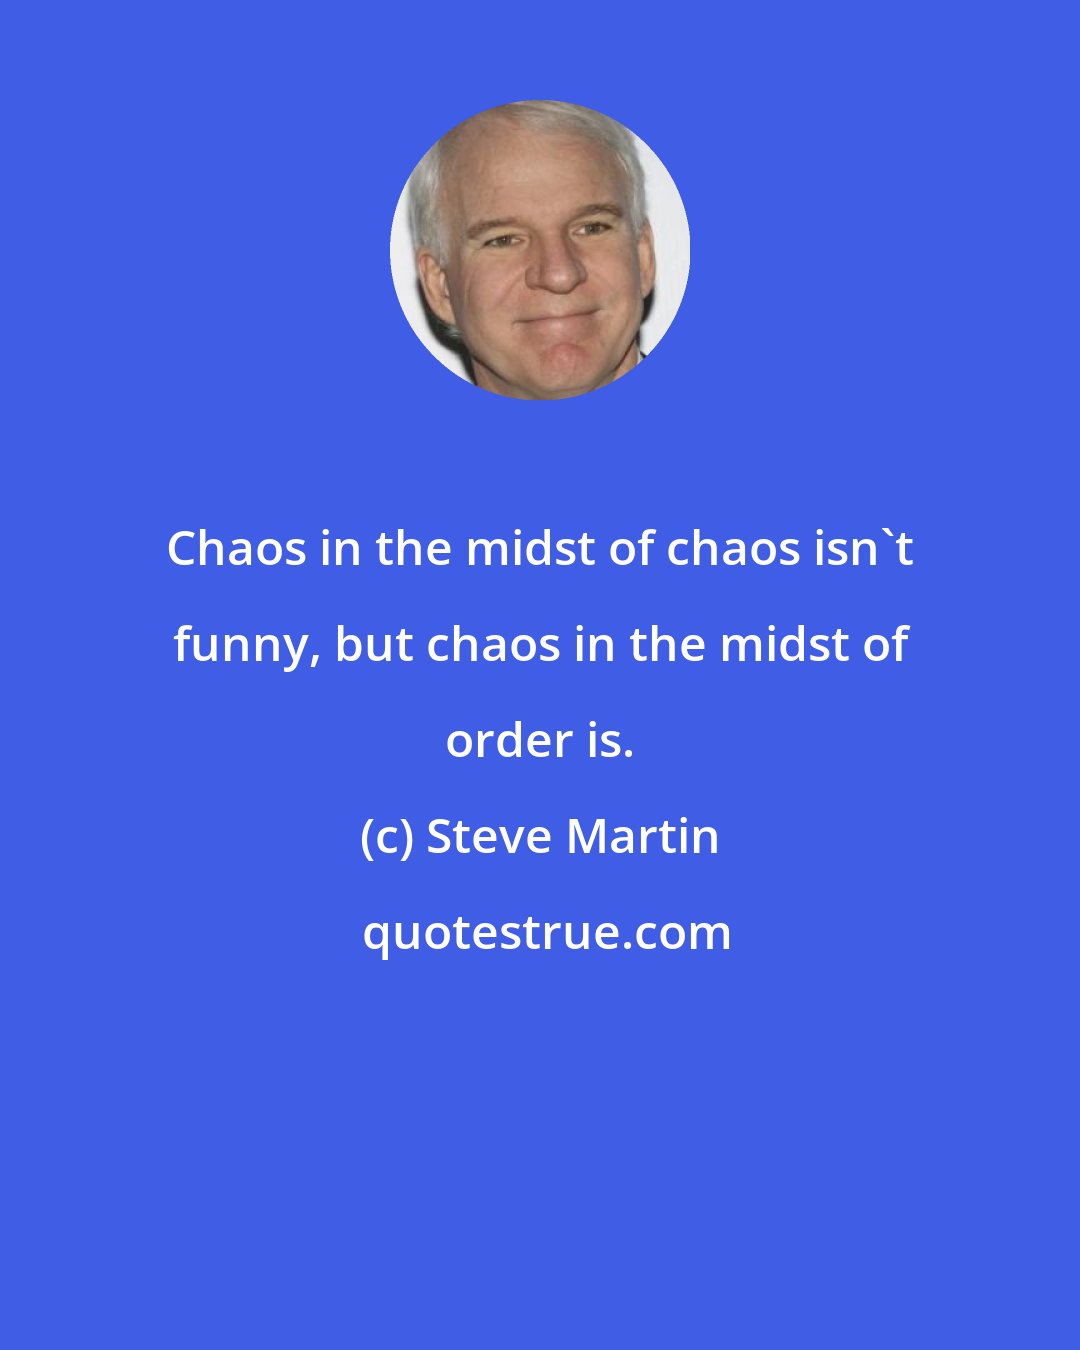 Steve Martin: Chaos in the midst of chaos isn't funny, but chaos in the midst of order is.